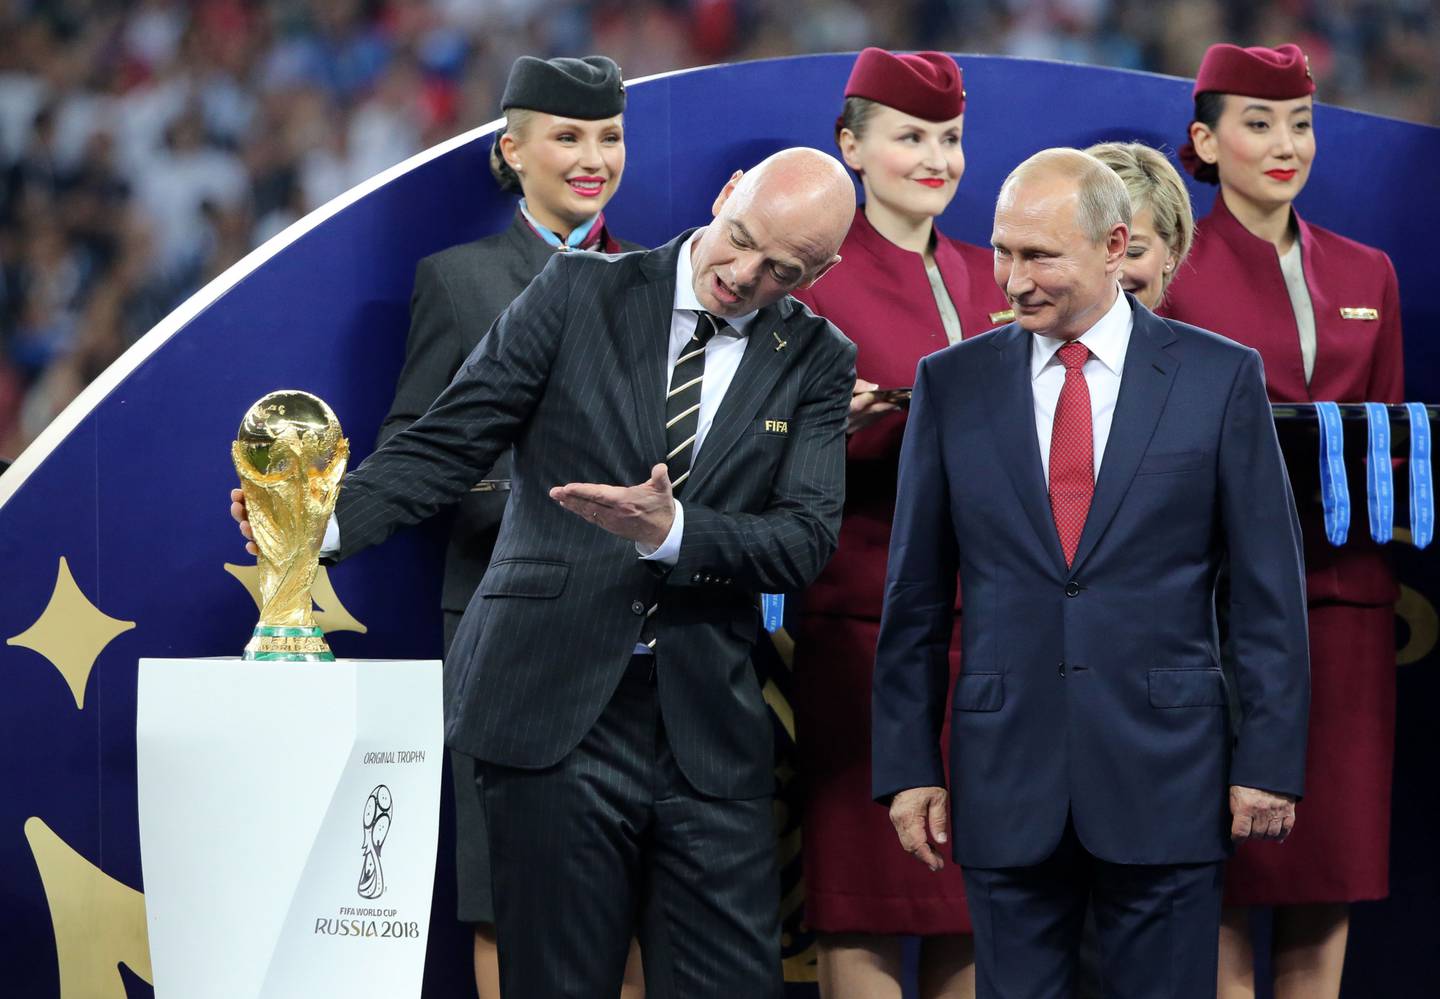 Gianni Infantino, left, gestures toward the World Cup trophy as Vladimir Putin prepares to award the trophy to France following the FIFA World Cup final match in Moscow in 2018.